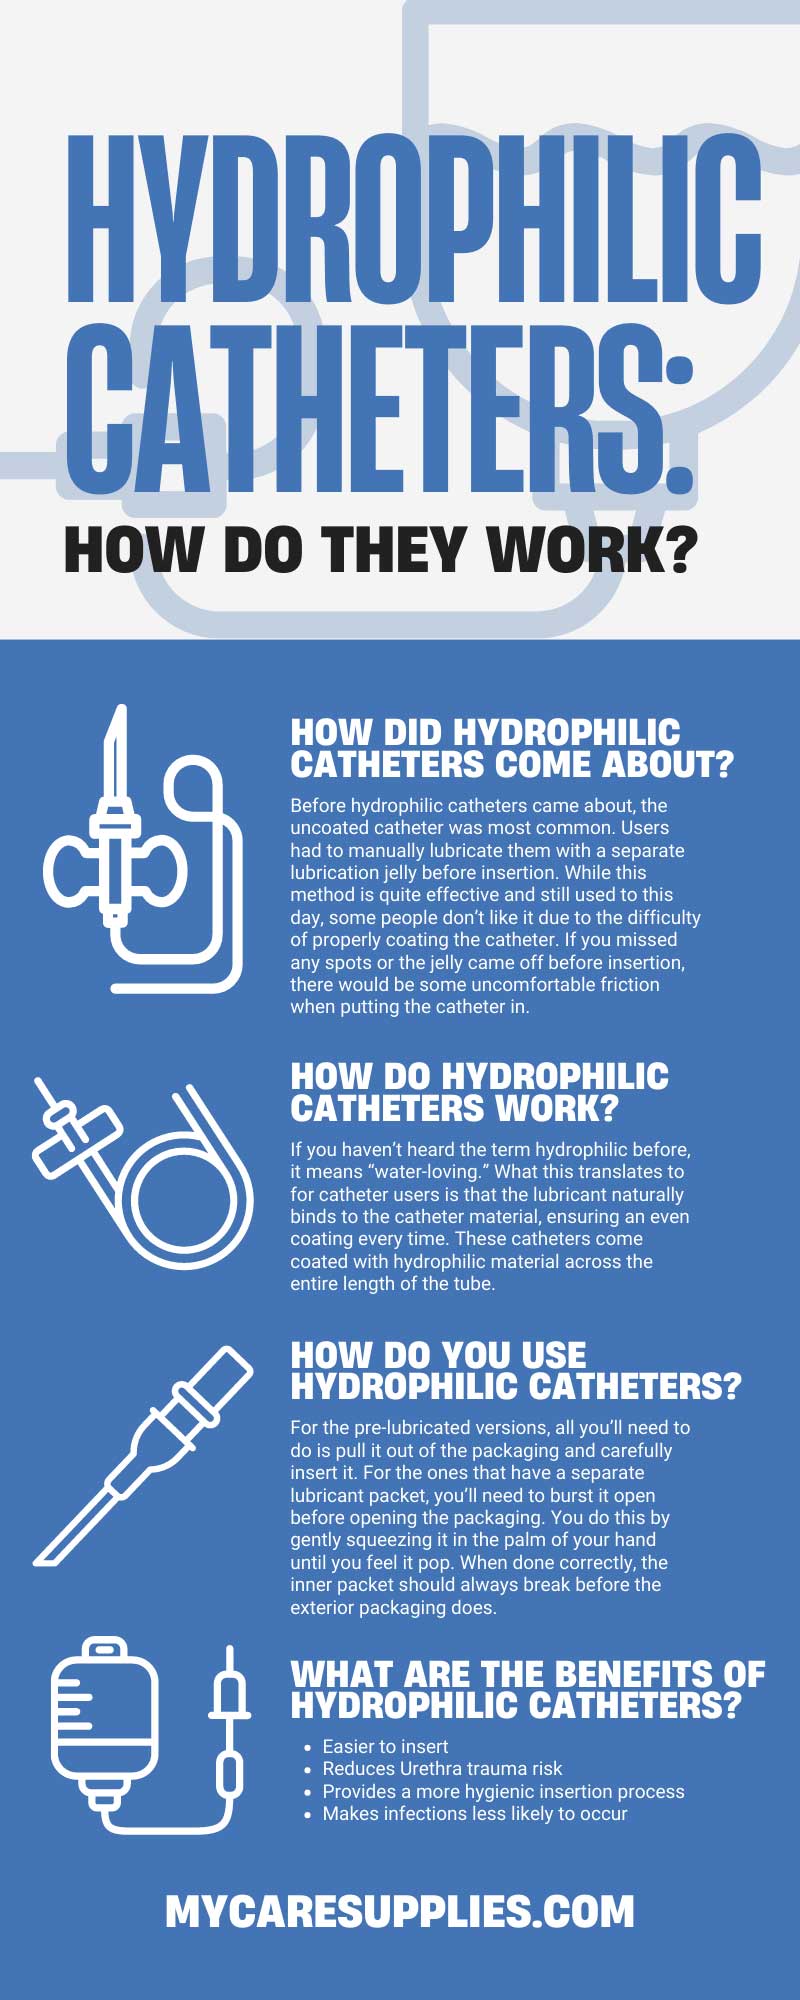 Hydrophilic Catheters: How Do They Work?